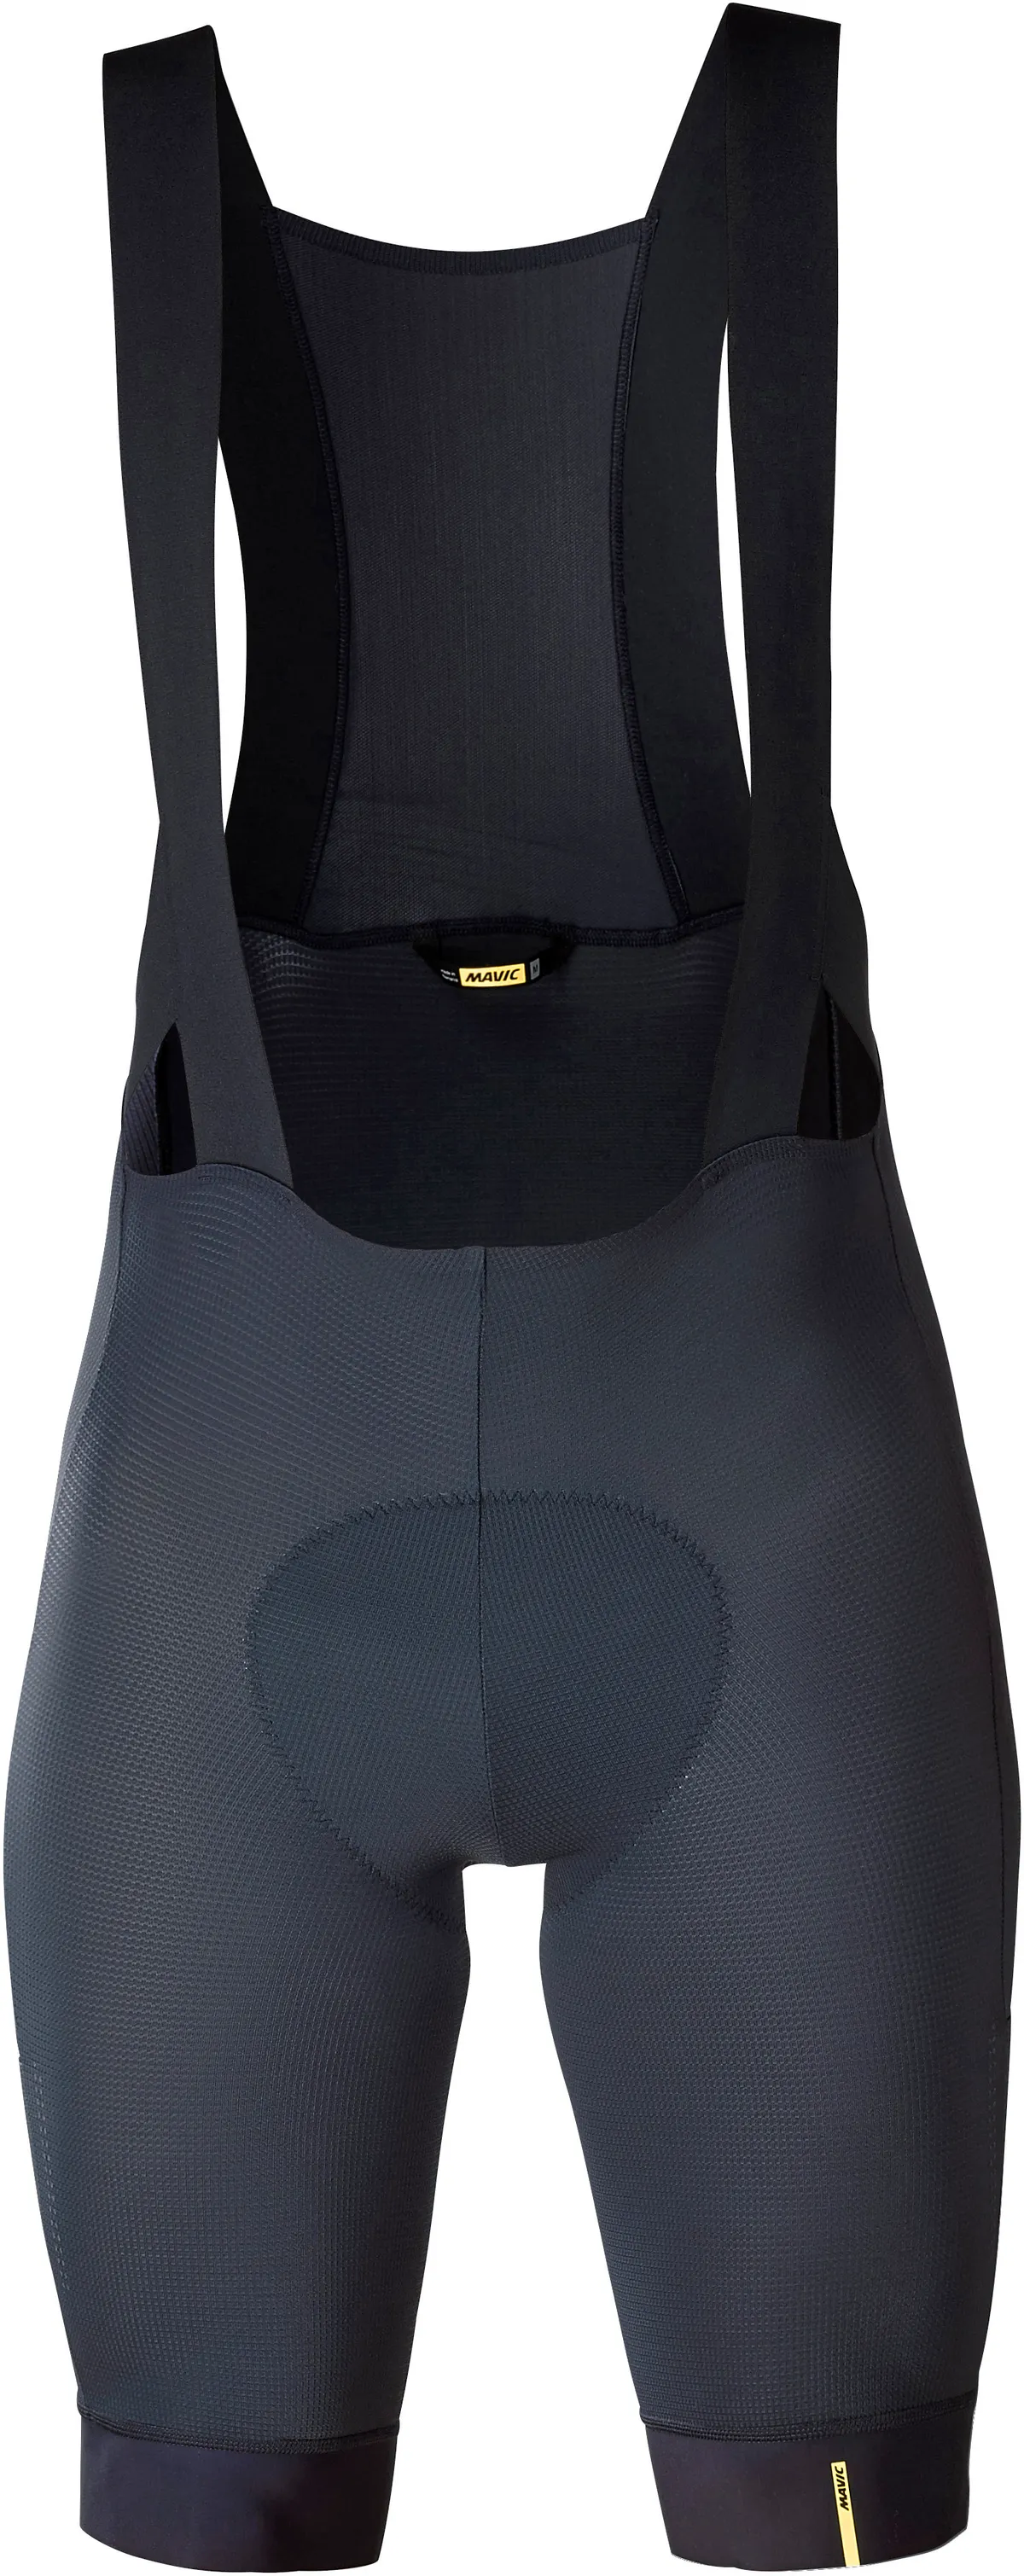 The Allroad bibs feature handy side pockets on the legs